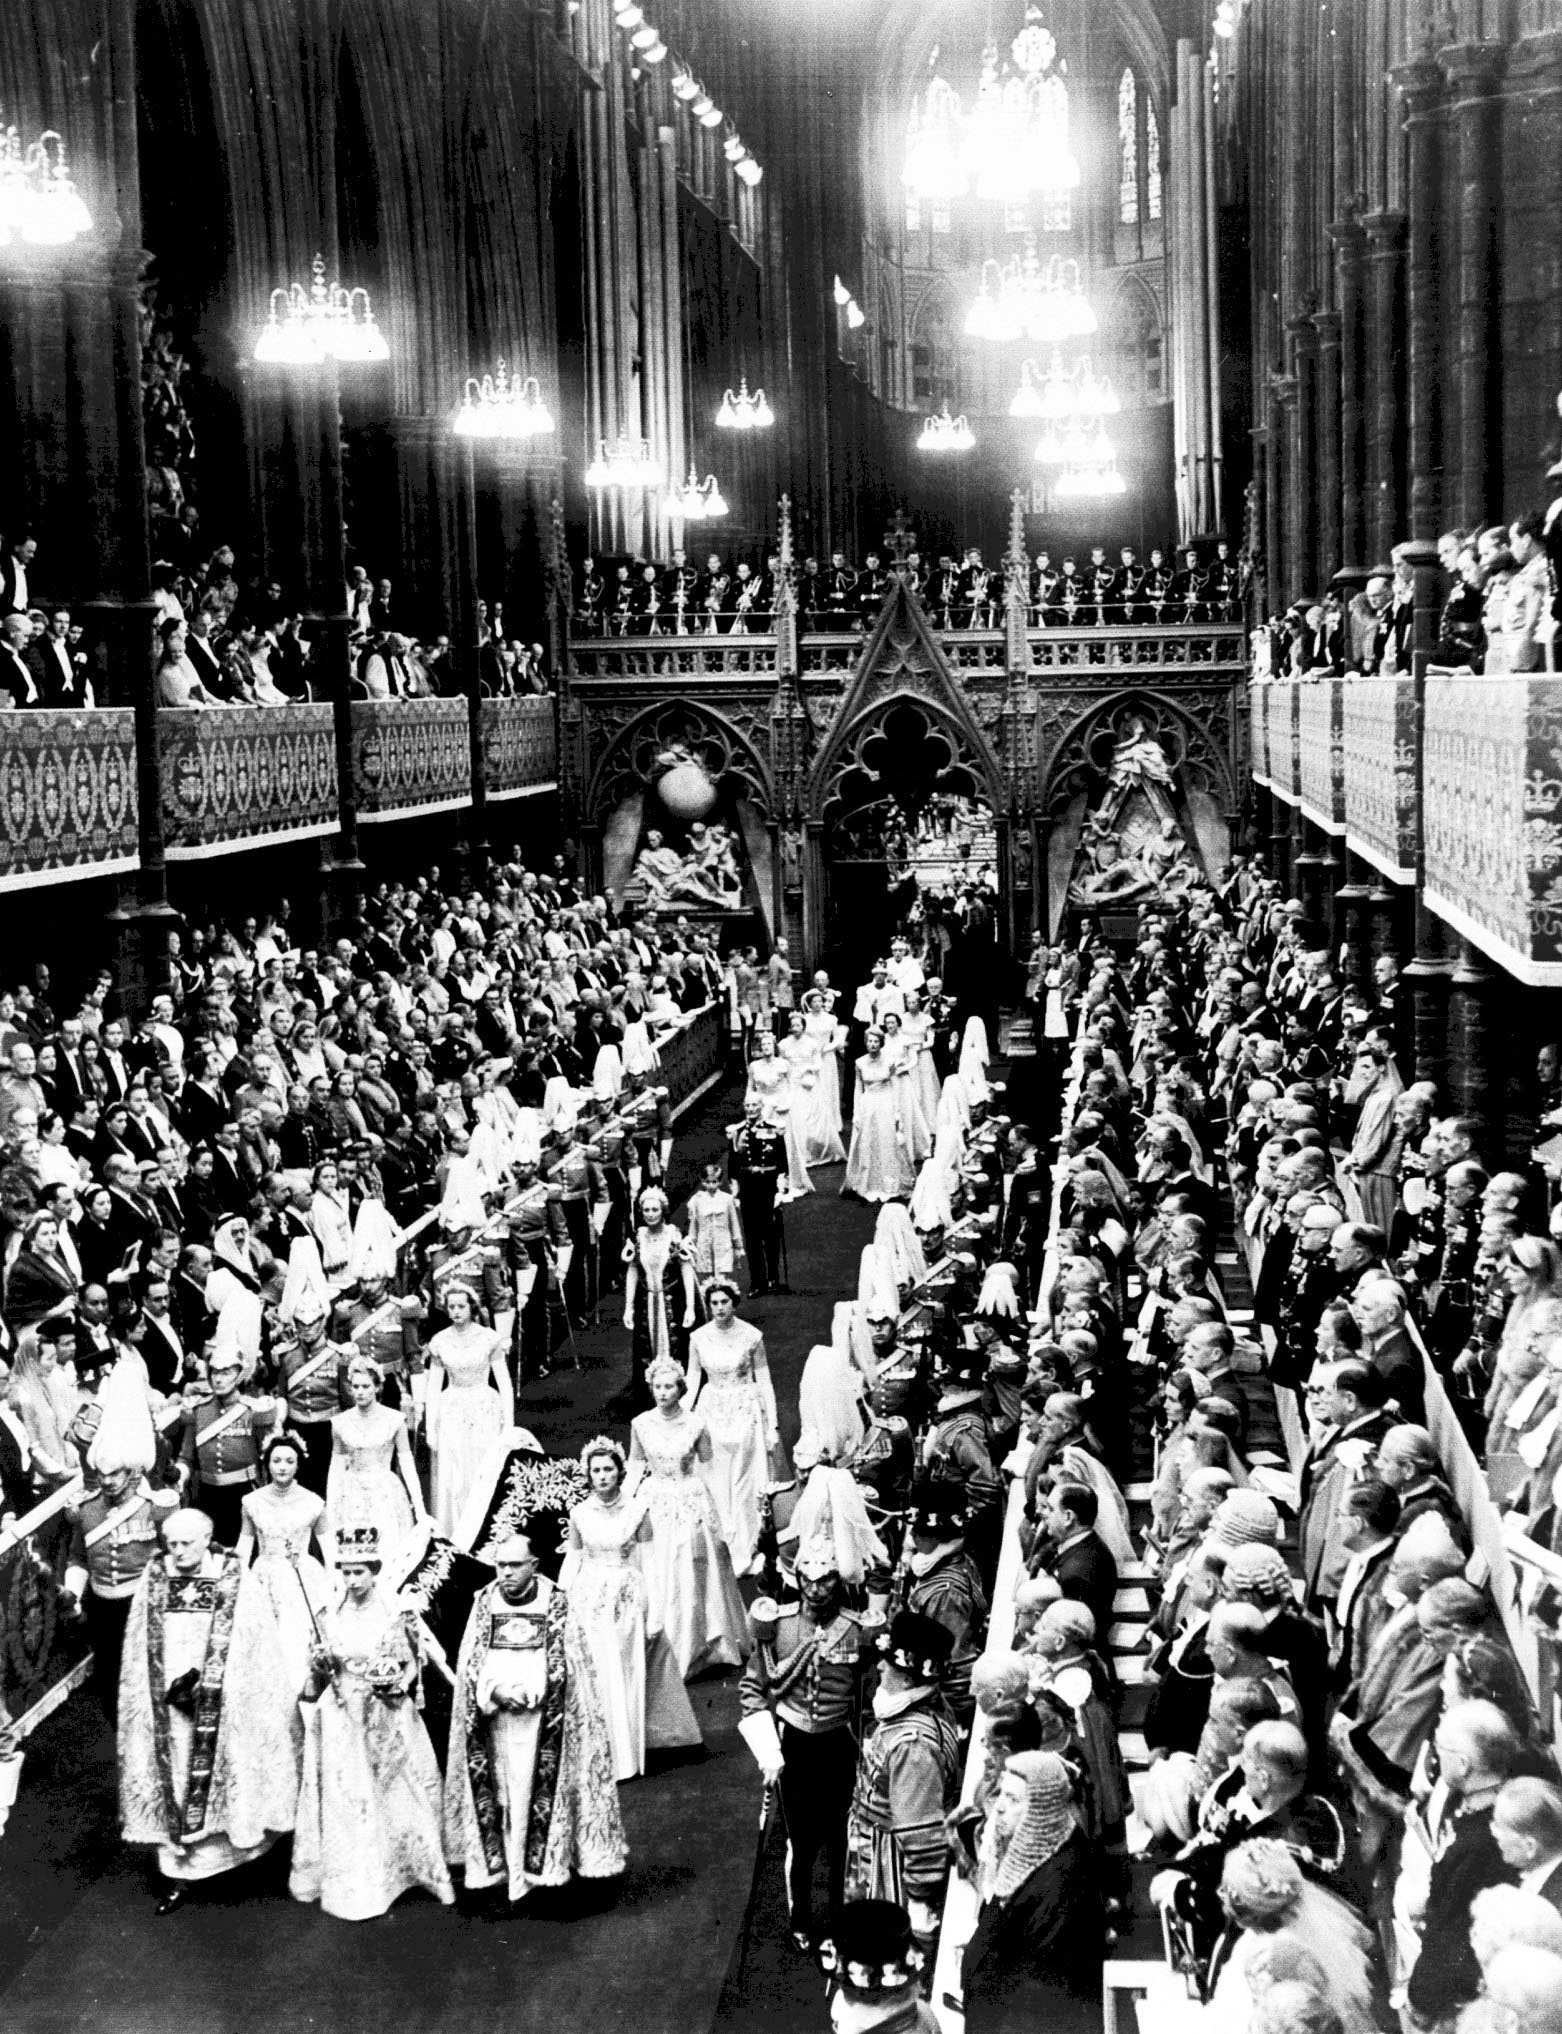 The Queen at Westminster Abbey for her coronation on June 2, 1953